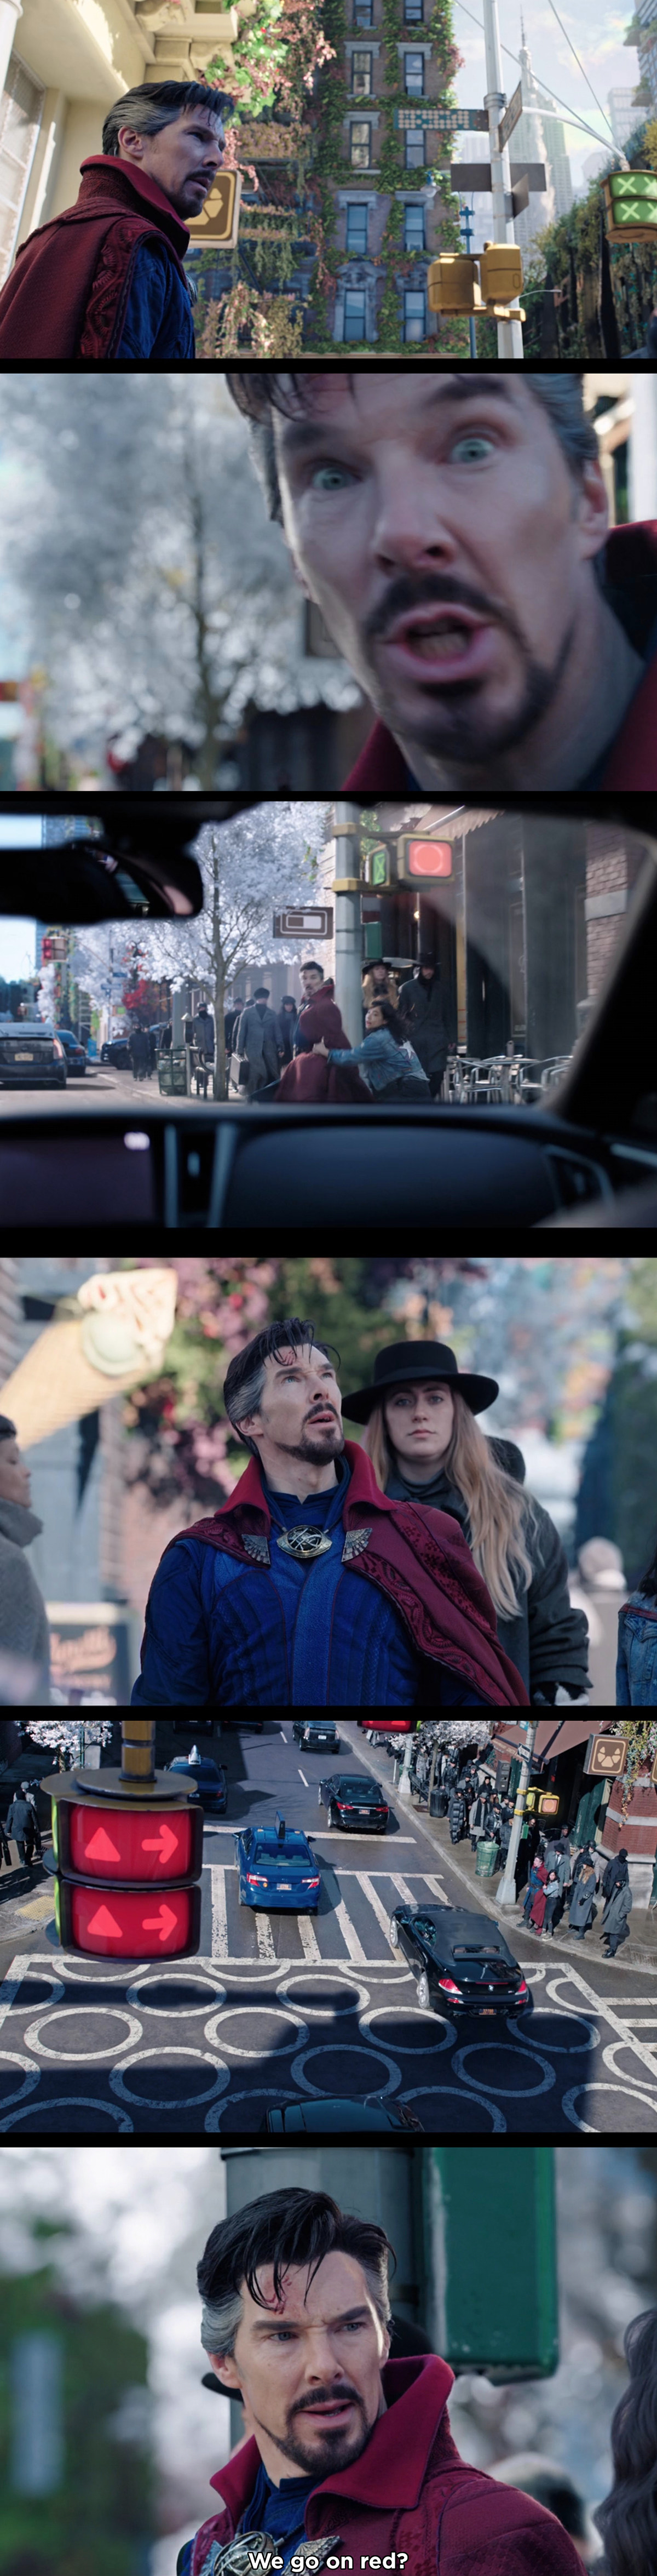 Doctor strange almost getting hit by a car and asking, we go on red?